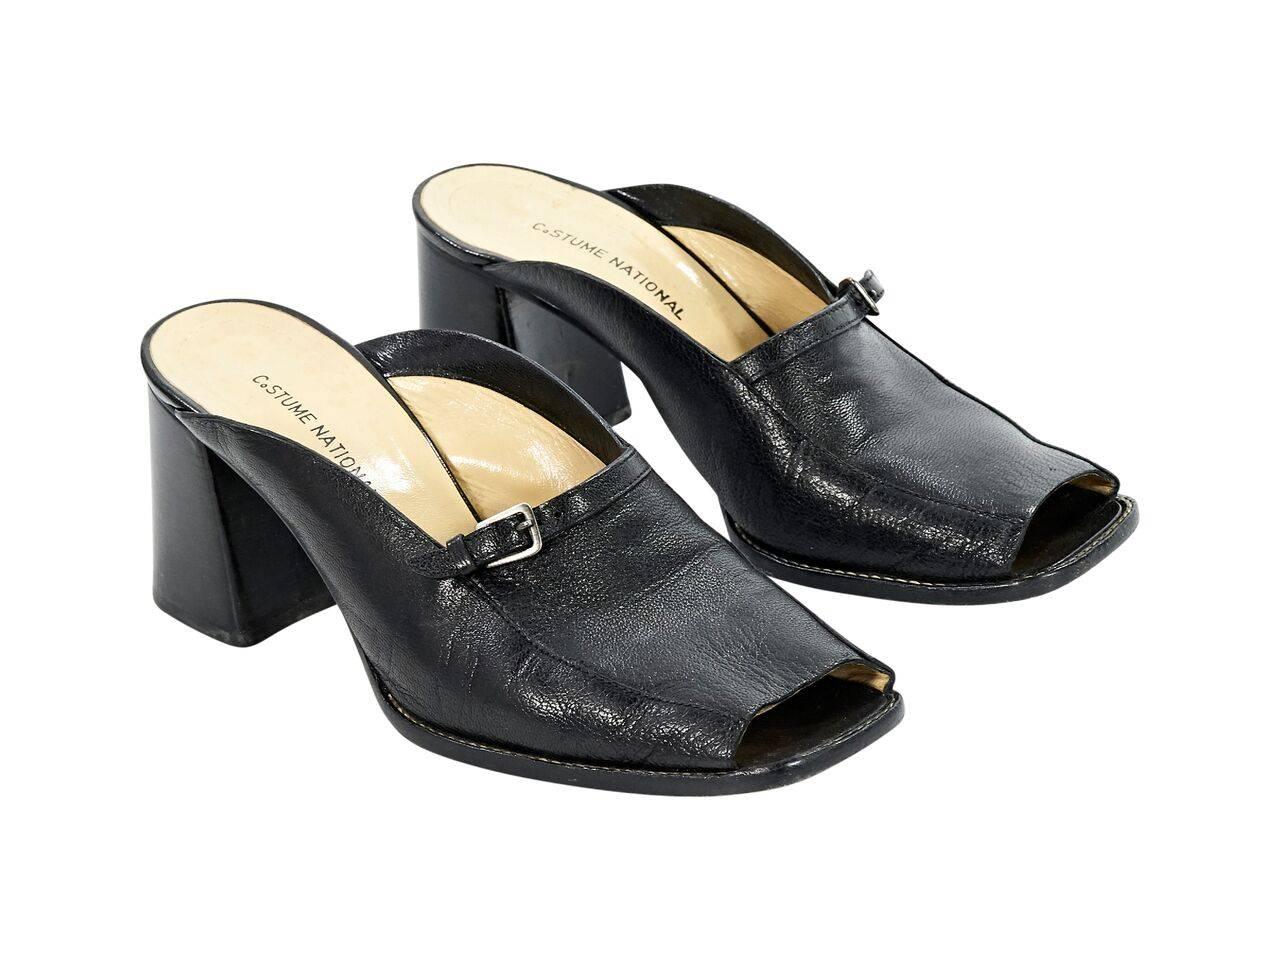 Product details:  Black leather loafer mules by Costume National.  Peep toe.  Chunky stacked heel.  Slip-on style. 
Condition: Pre-owned. Very good.
Est. Retail $ 498.00